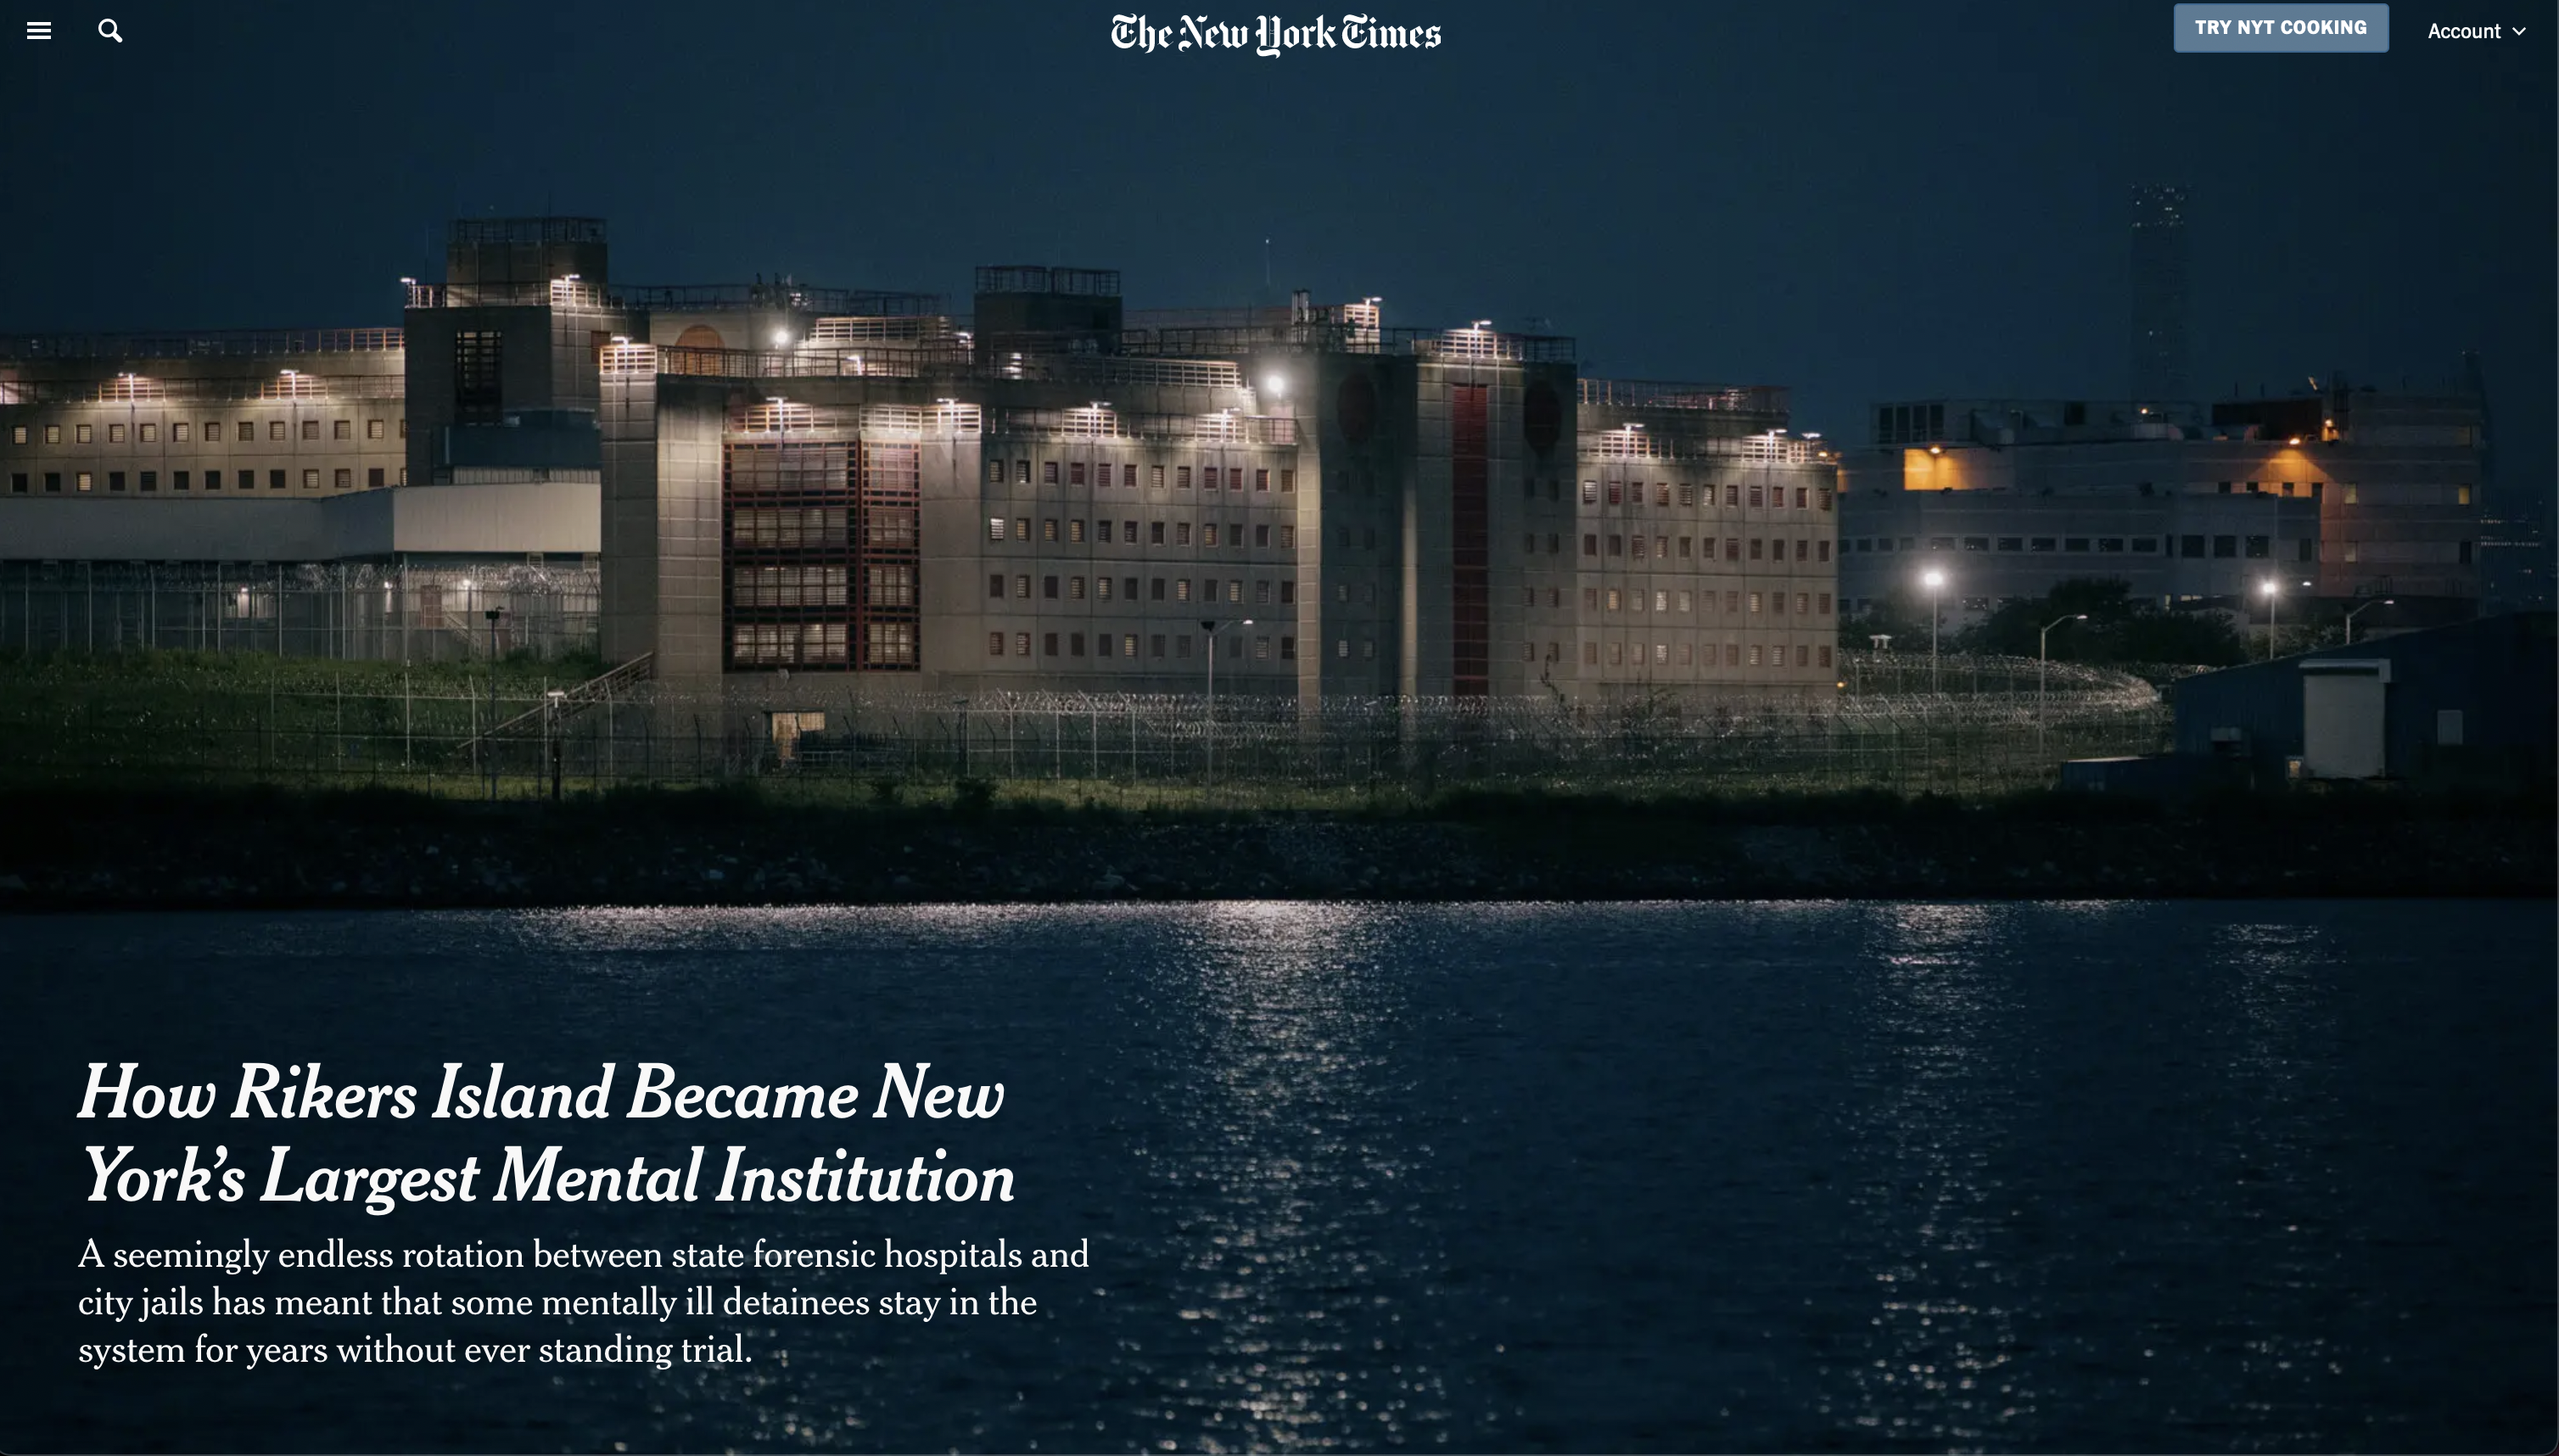 for The New York Times: How Rikers Island Became New York’s Largest Mental Institution